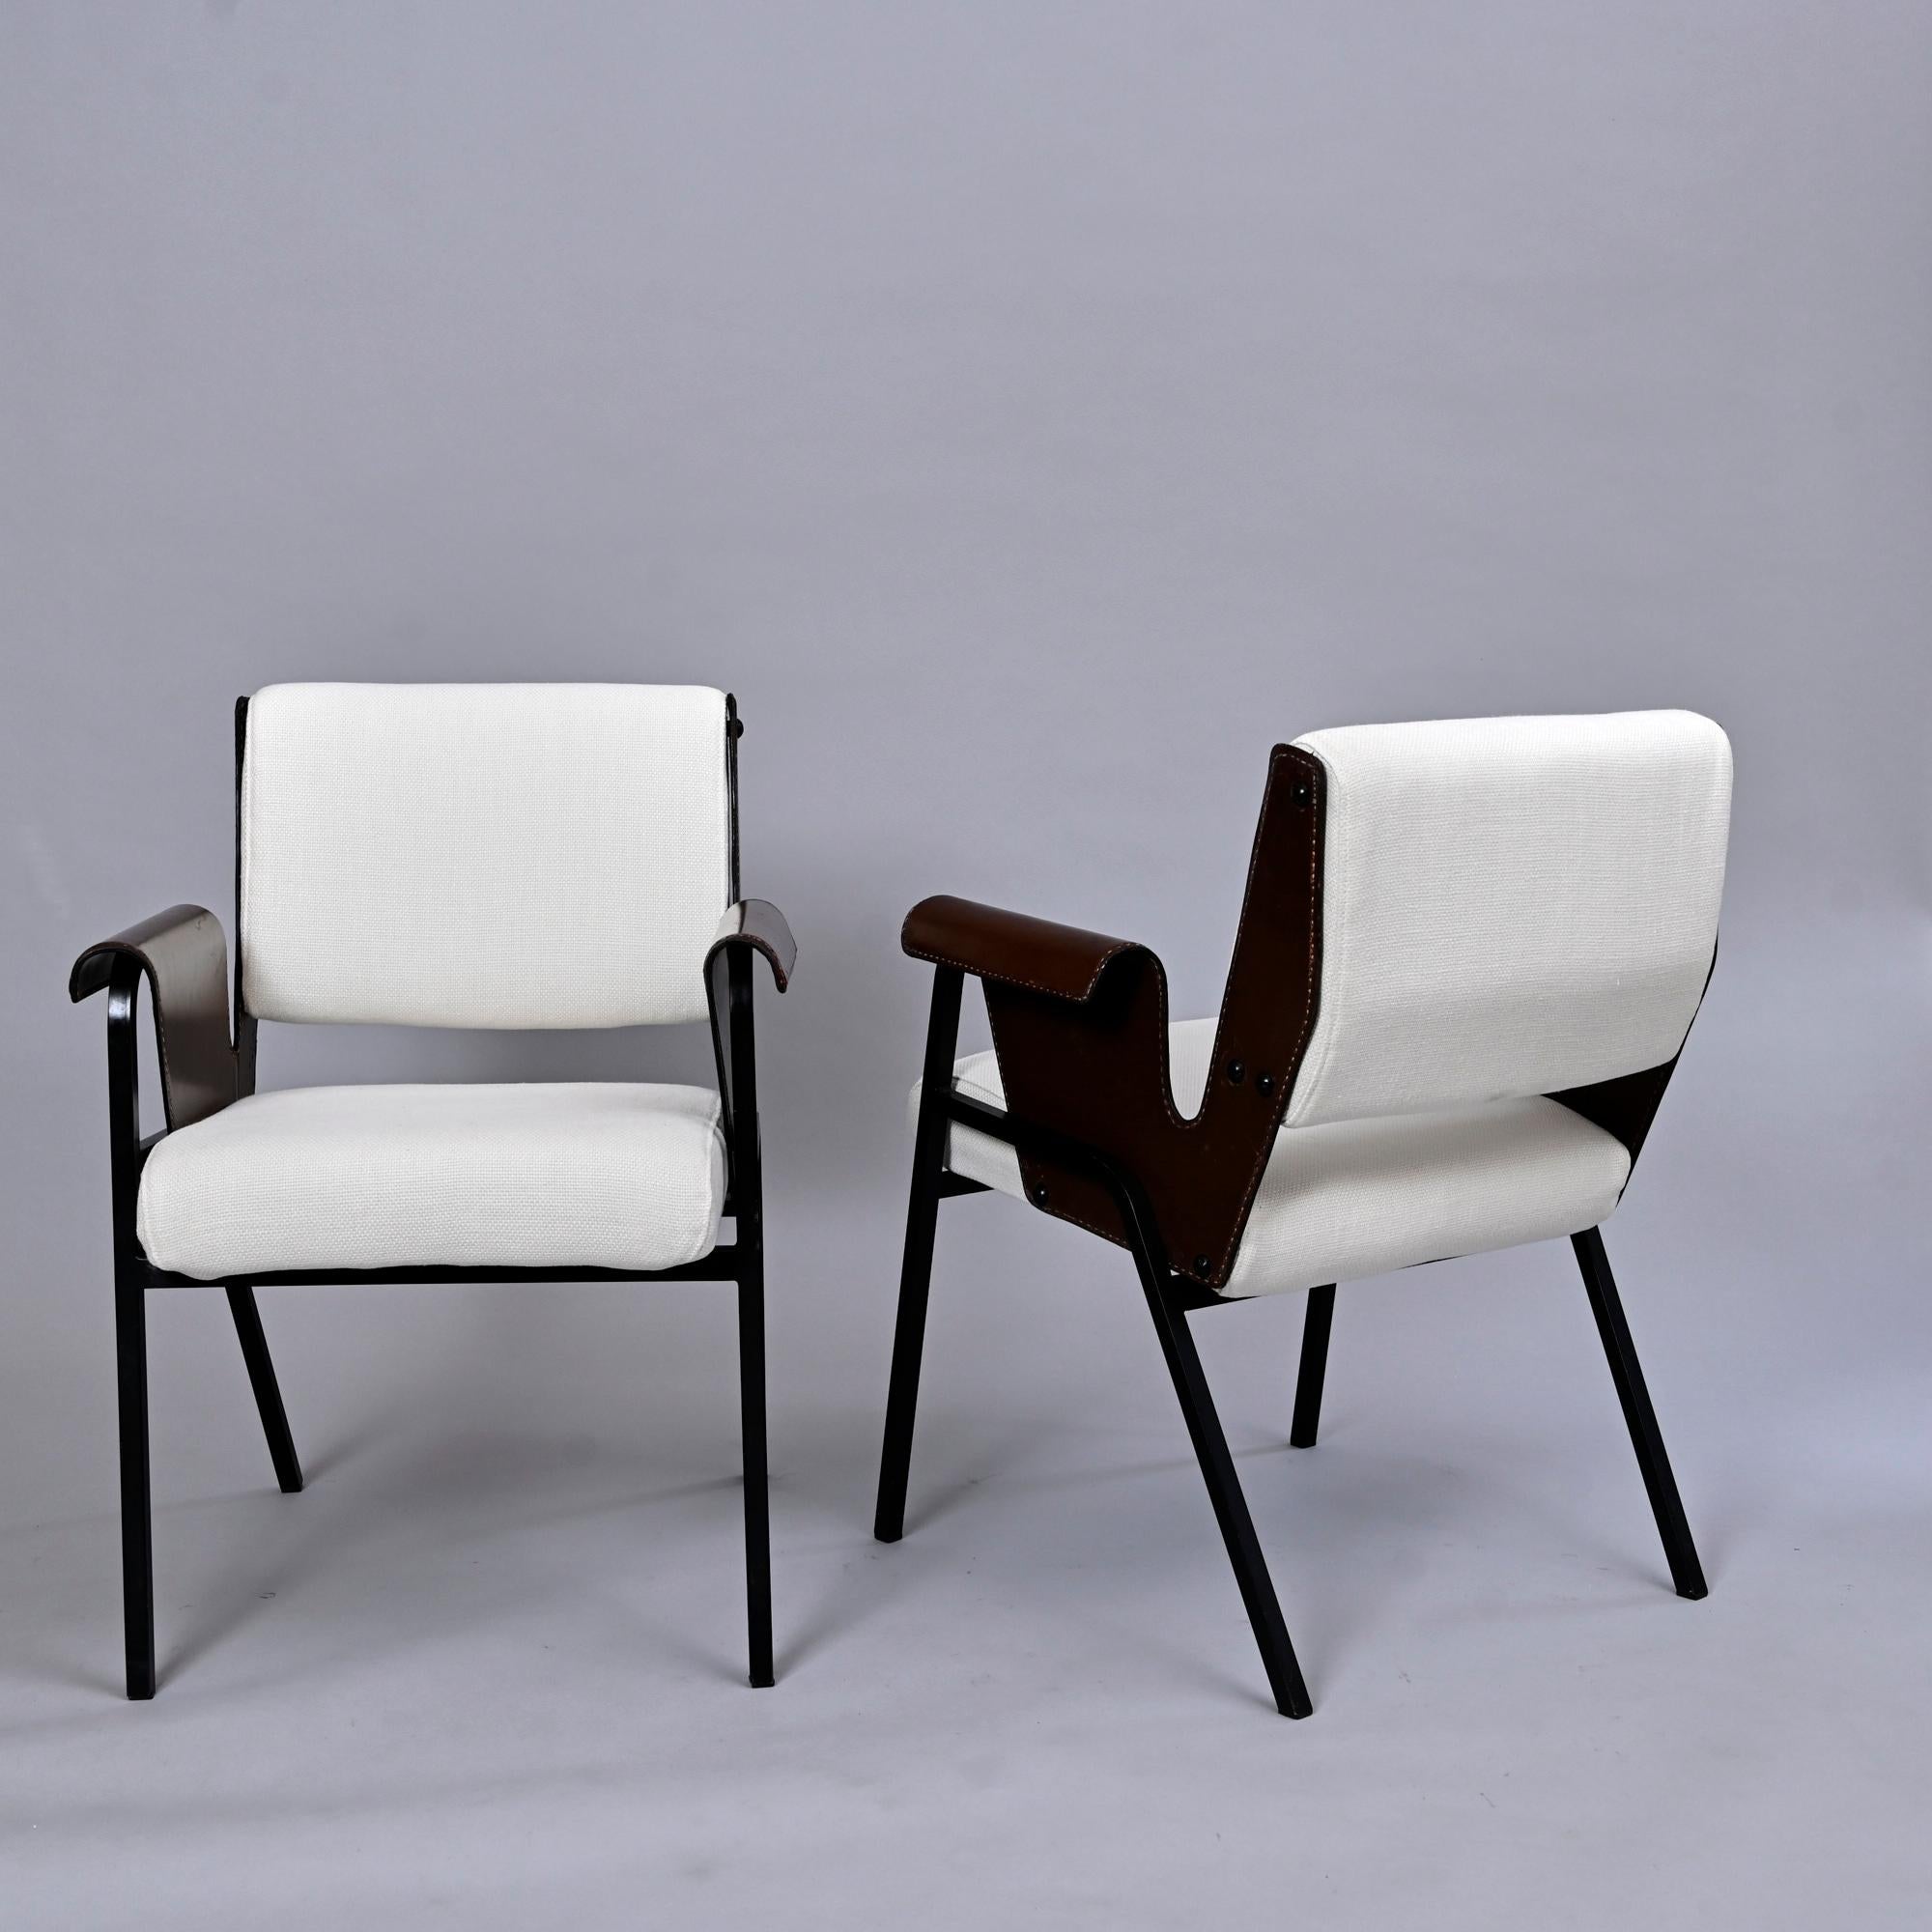 Italian Pair of Gustavo Pulitzer 'Albengo' Stitched Leather Chairs, C1950, Italy